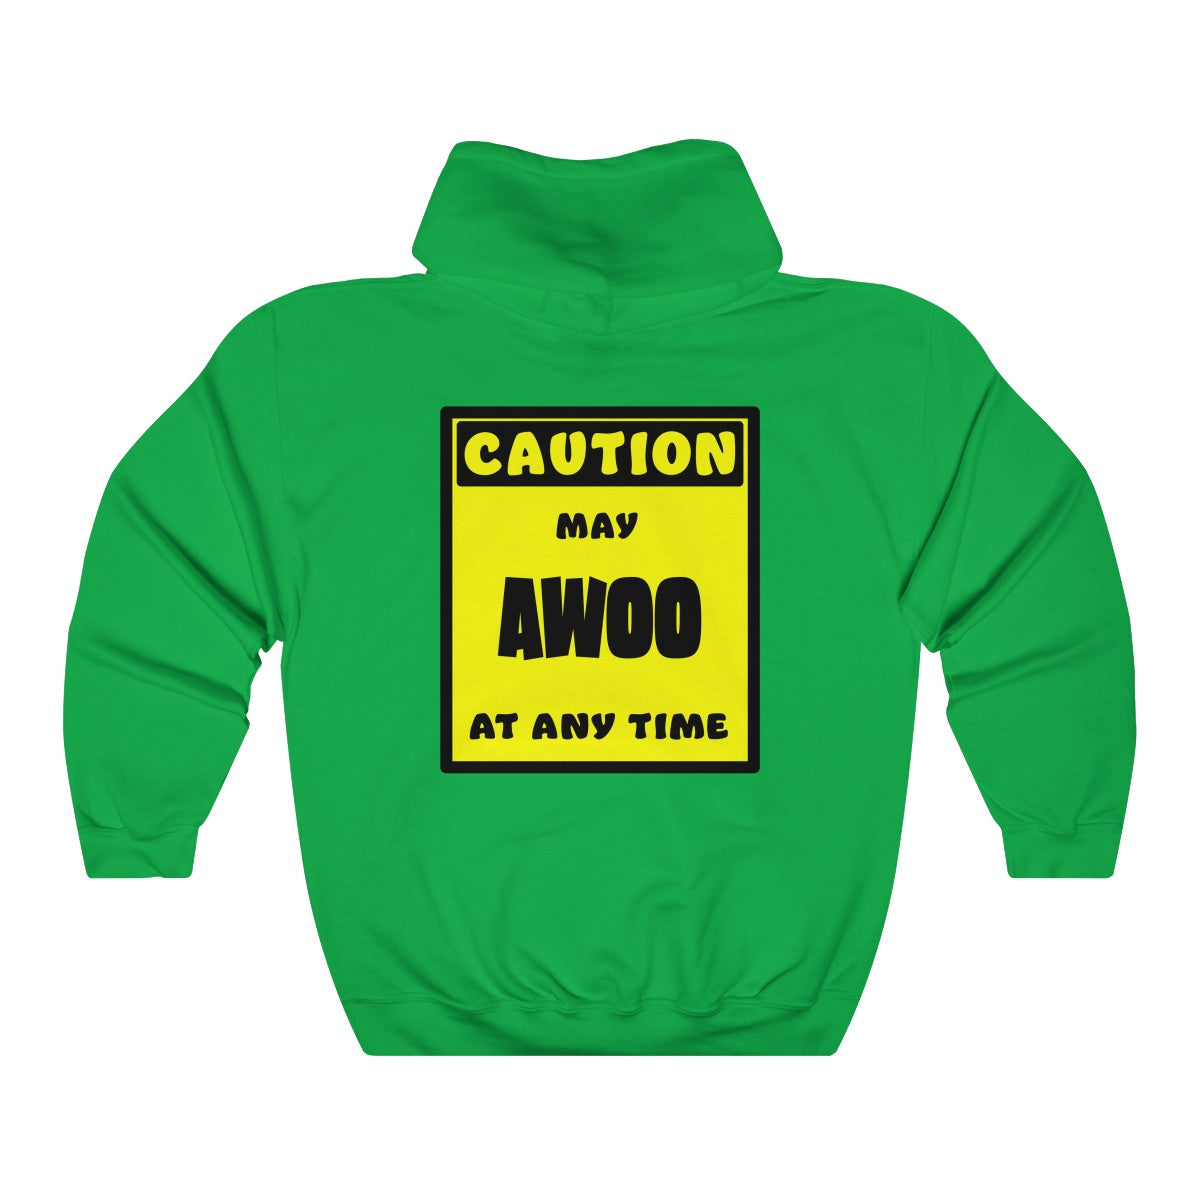 CAUTION! May AWOO at any time! - Hoodie Hoodie AFLT-Whootorca Green S 